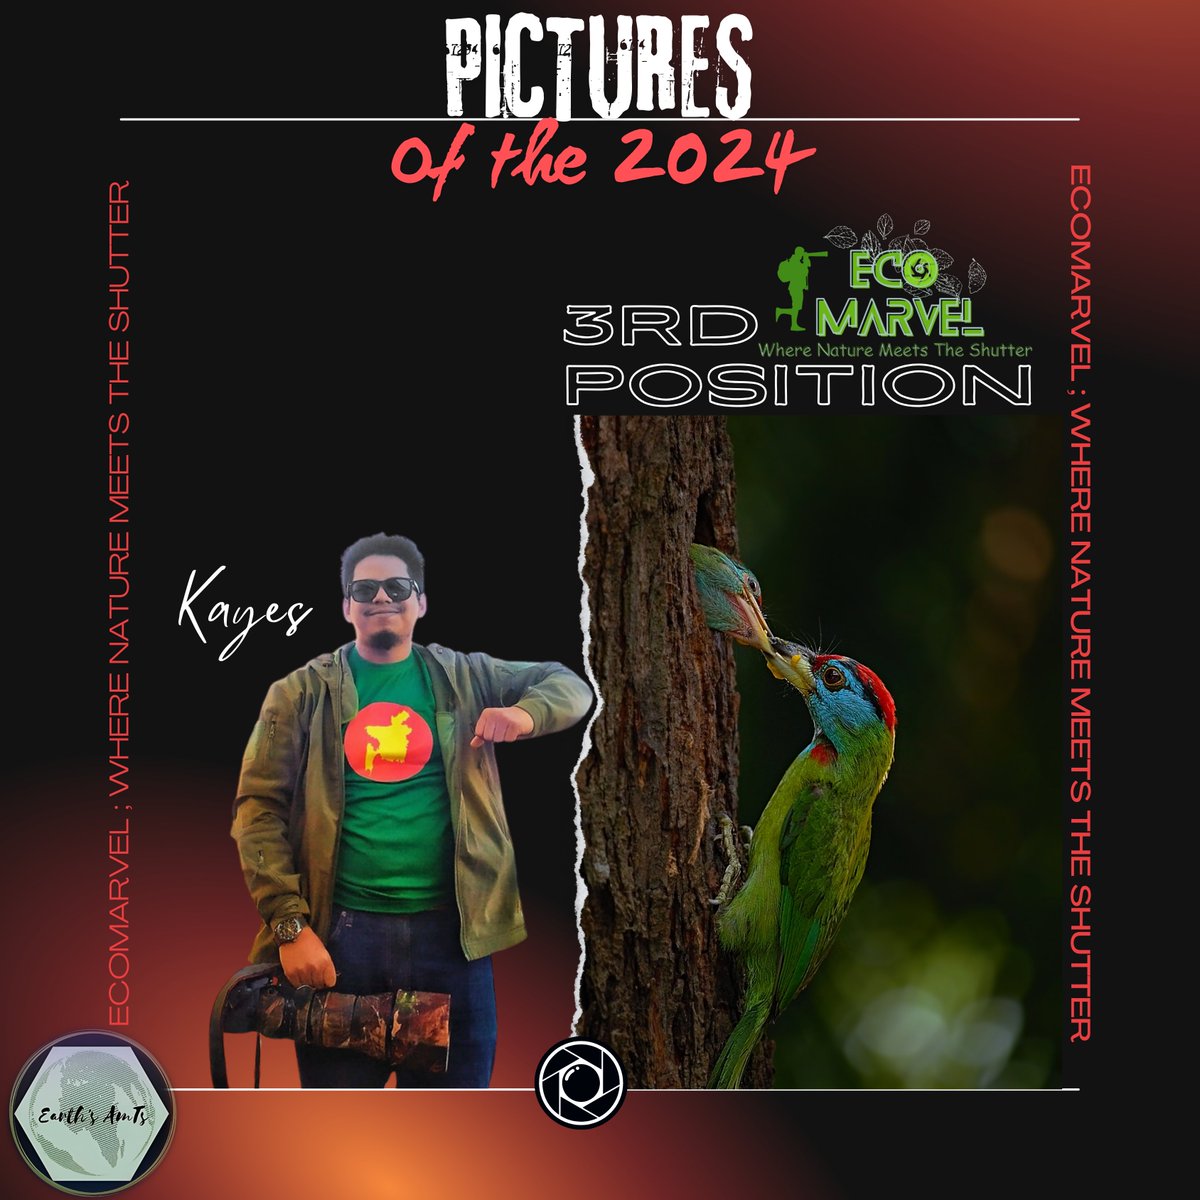 Let's celebrate the photographer's achievement 3rd - Md Kayes #ecomarvel_where_nature_meets_the_shutter #ecomarvel #photography #photographycontest #earthsantsorg